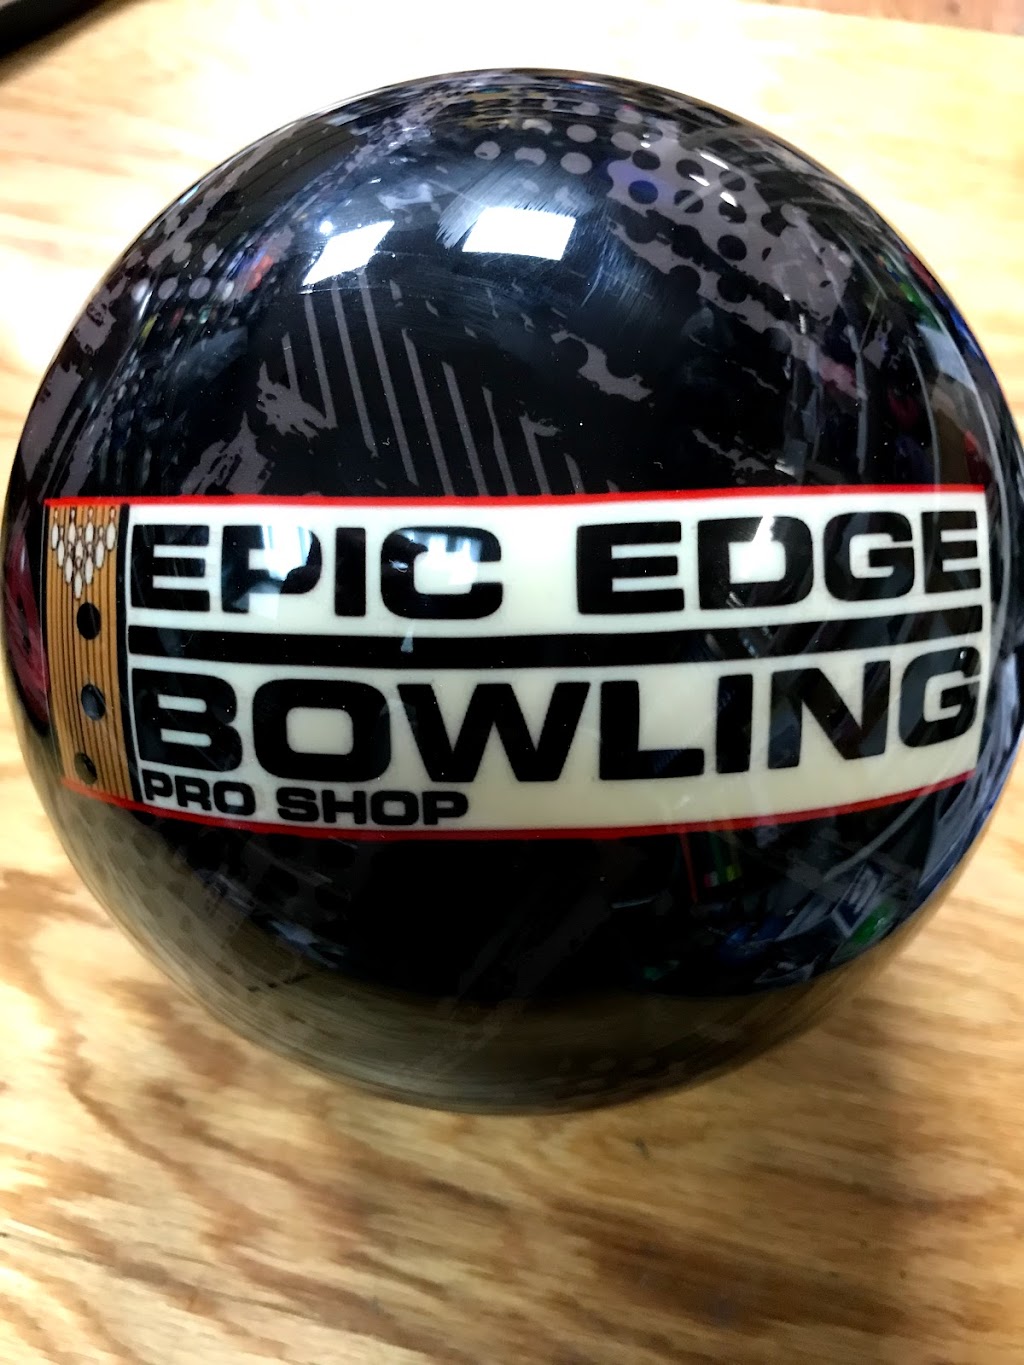 Epic Edge Bowling Pro Shop | 56 Tanners Ln, Levittown, NY 11756 | Phone: (516) 554-7089